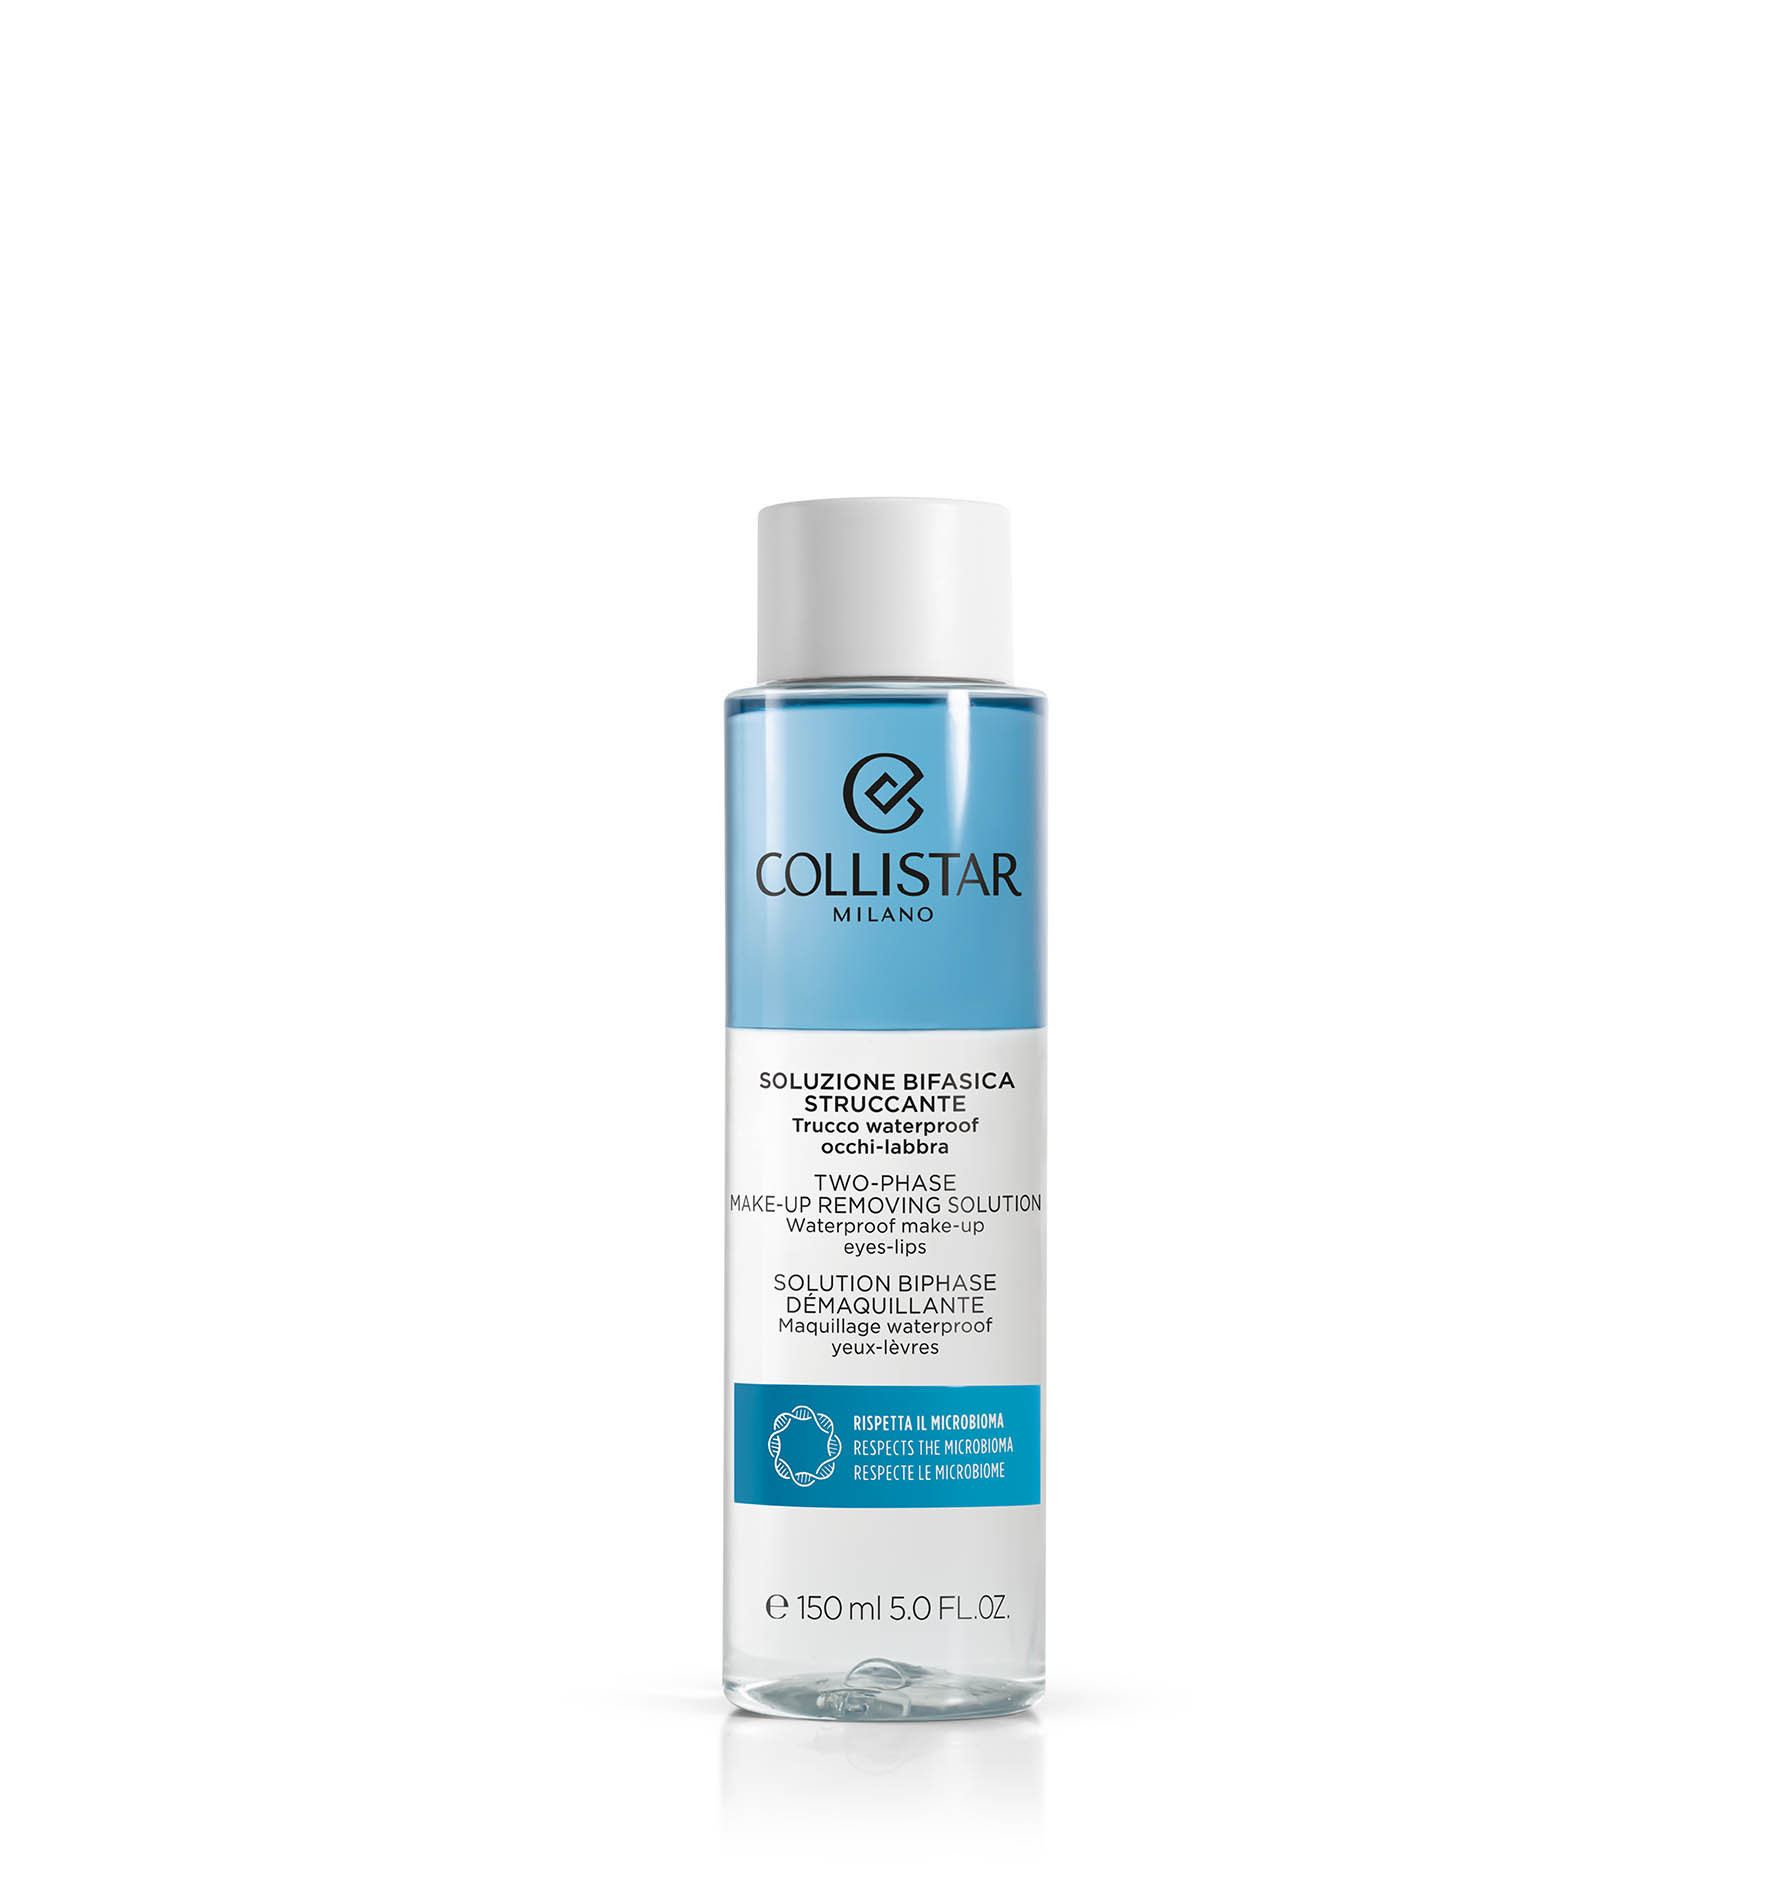 TWO-PHASE MAKE-UP REMOVING SOLUTION | Collistar - Shop Online Ufficiale